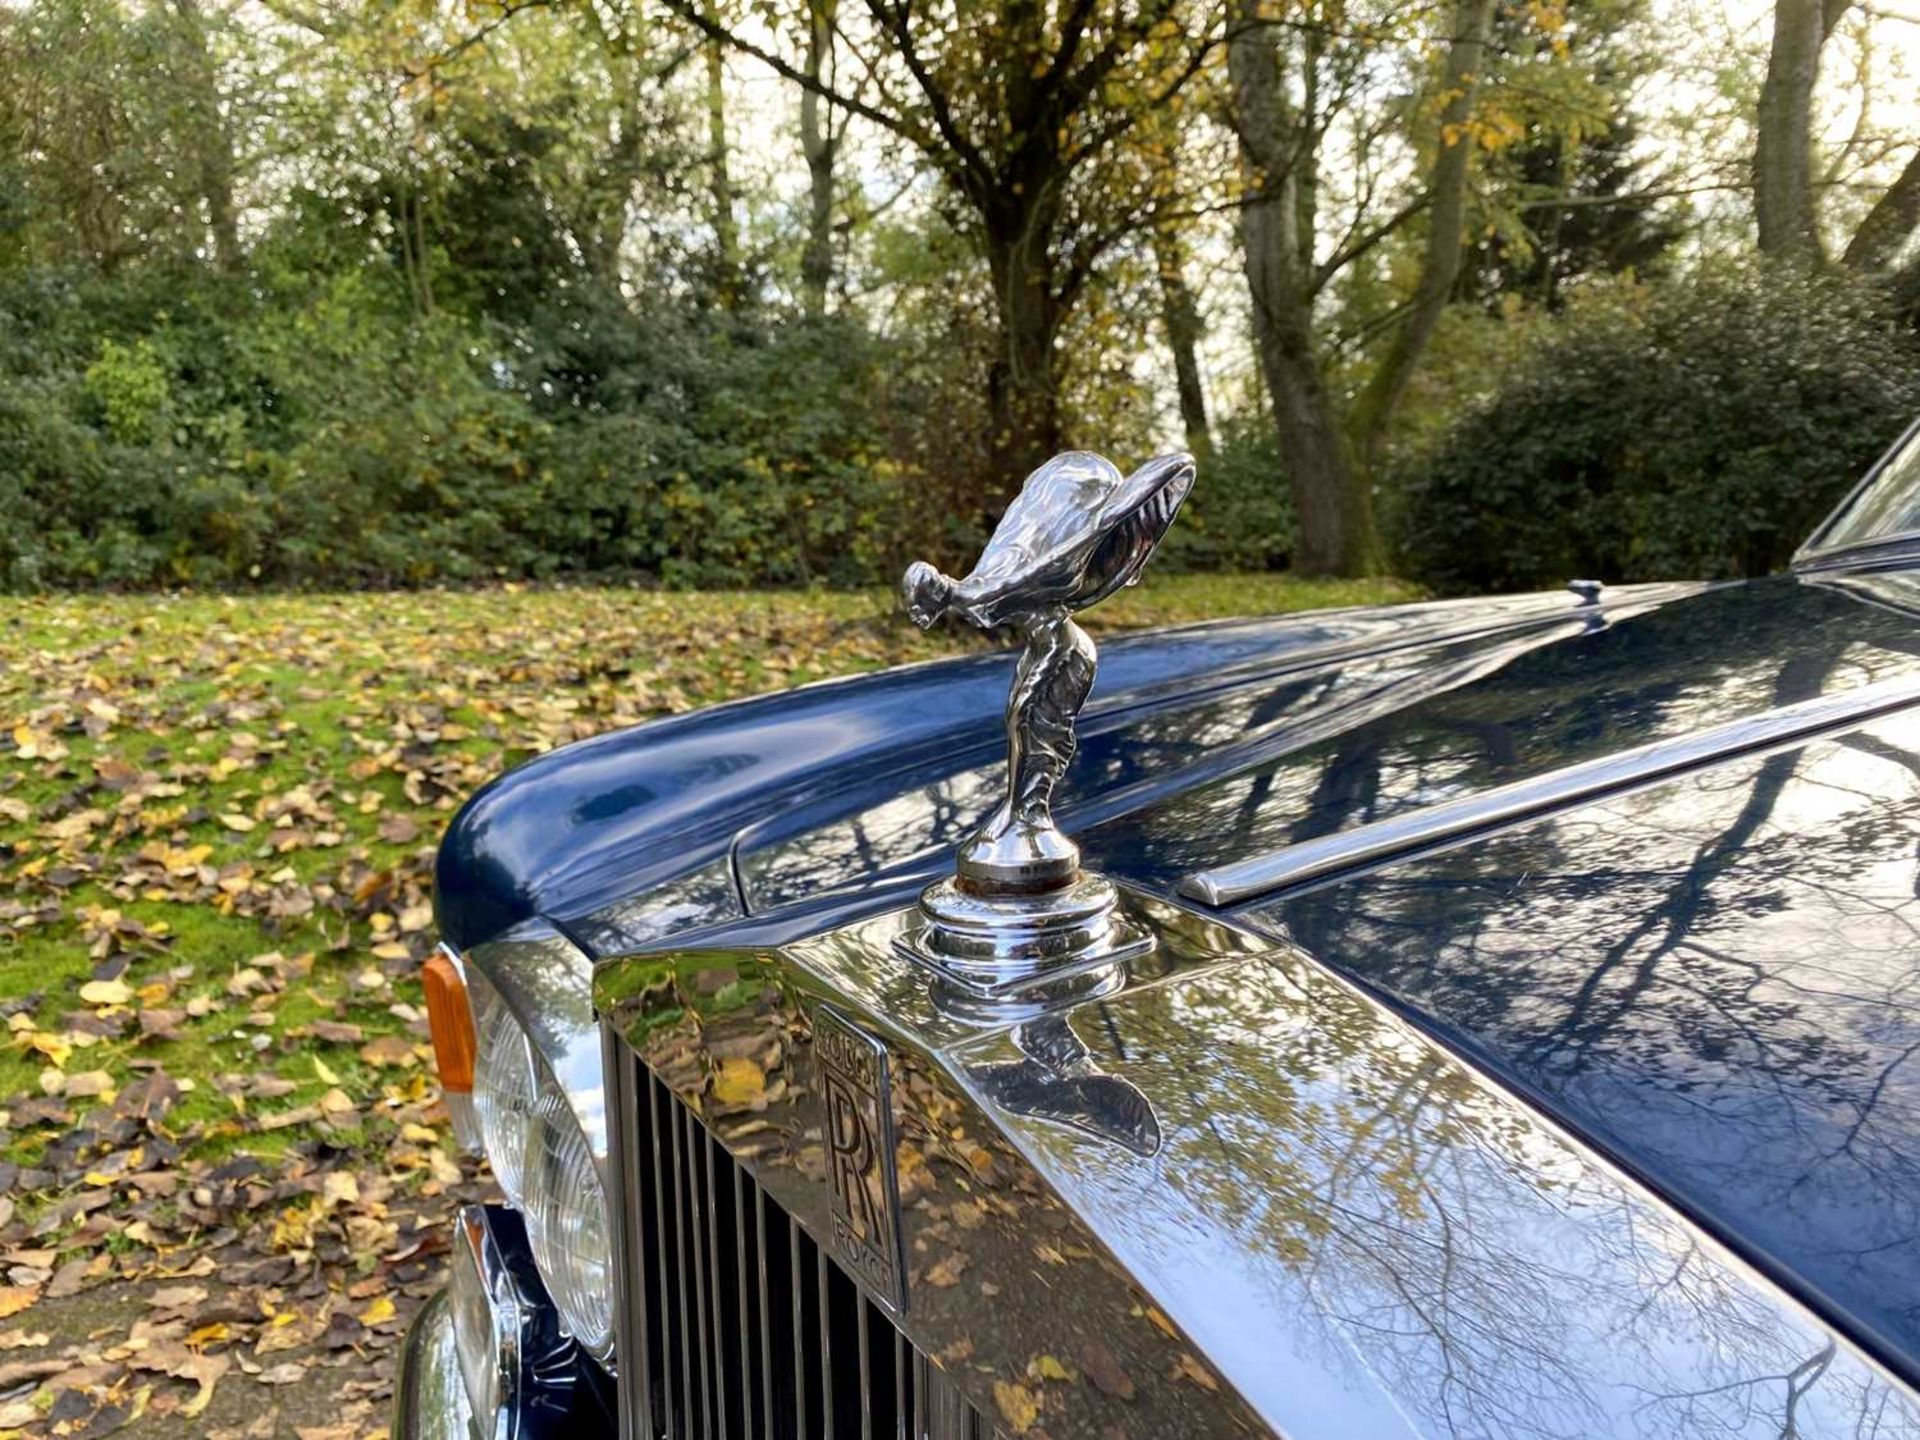 1971 Rolls-Royce Corniche Saloon Finished in Royal Navy Blue with Tobacco hide - Image 90 of 100